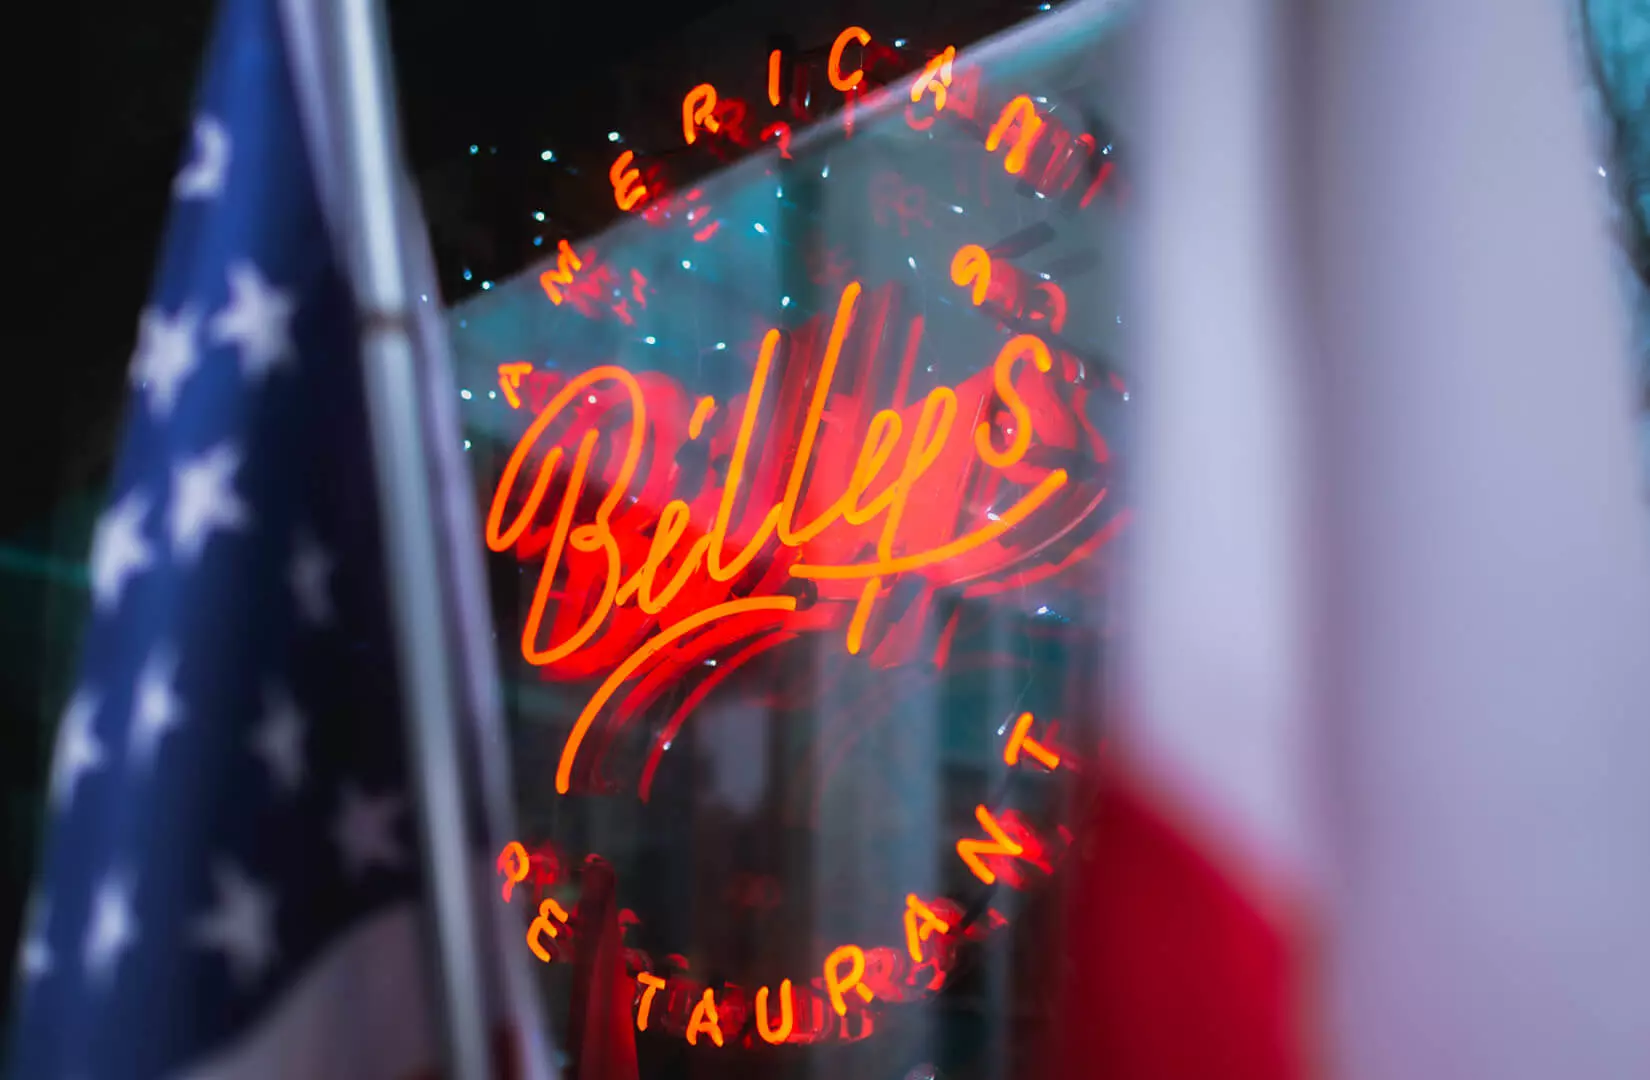 Billy's - Red neon sign in American restaurant